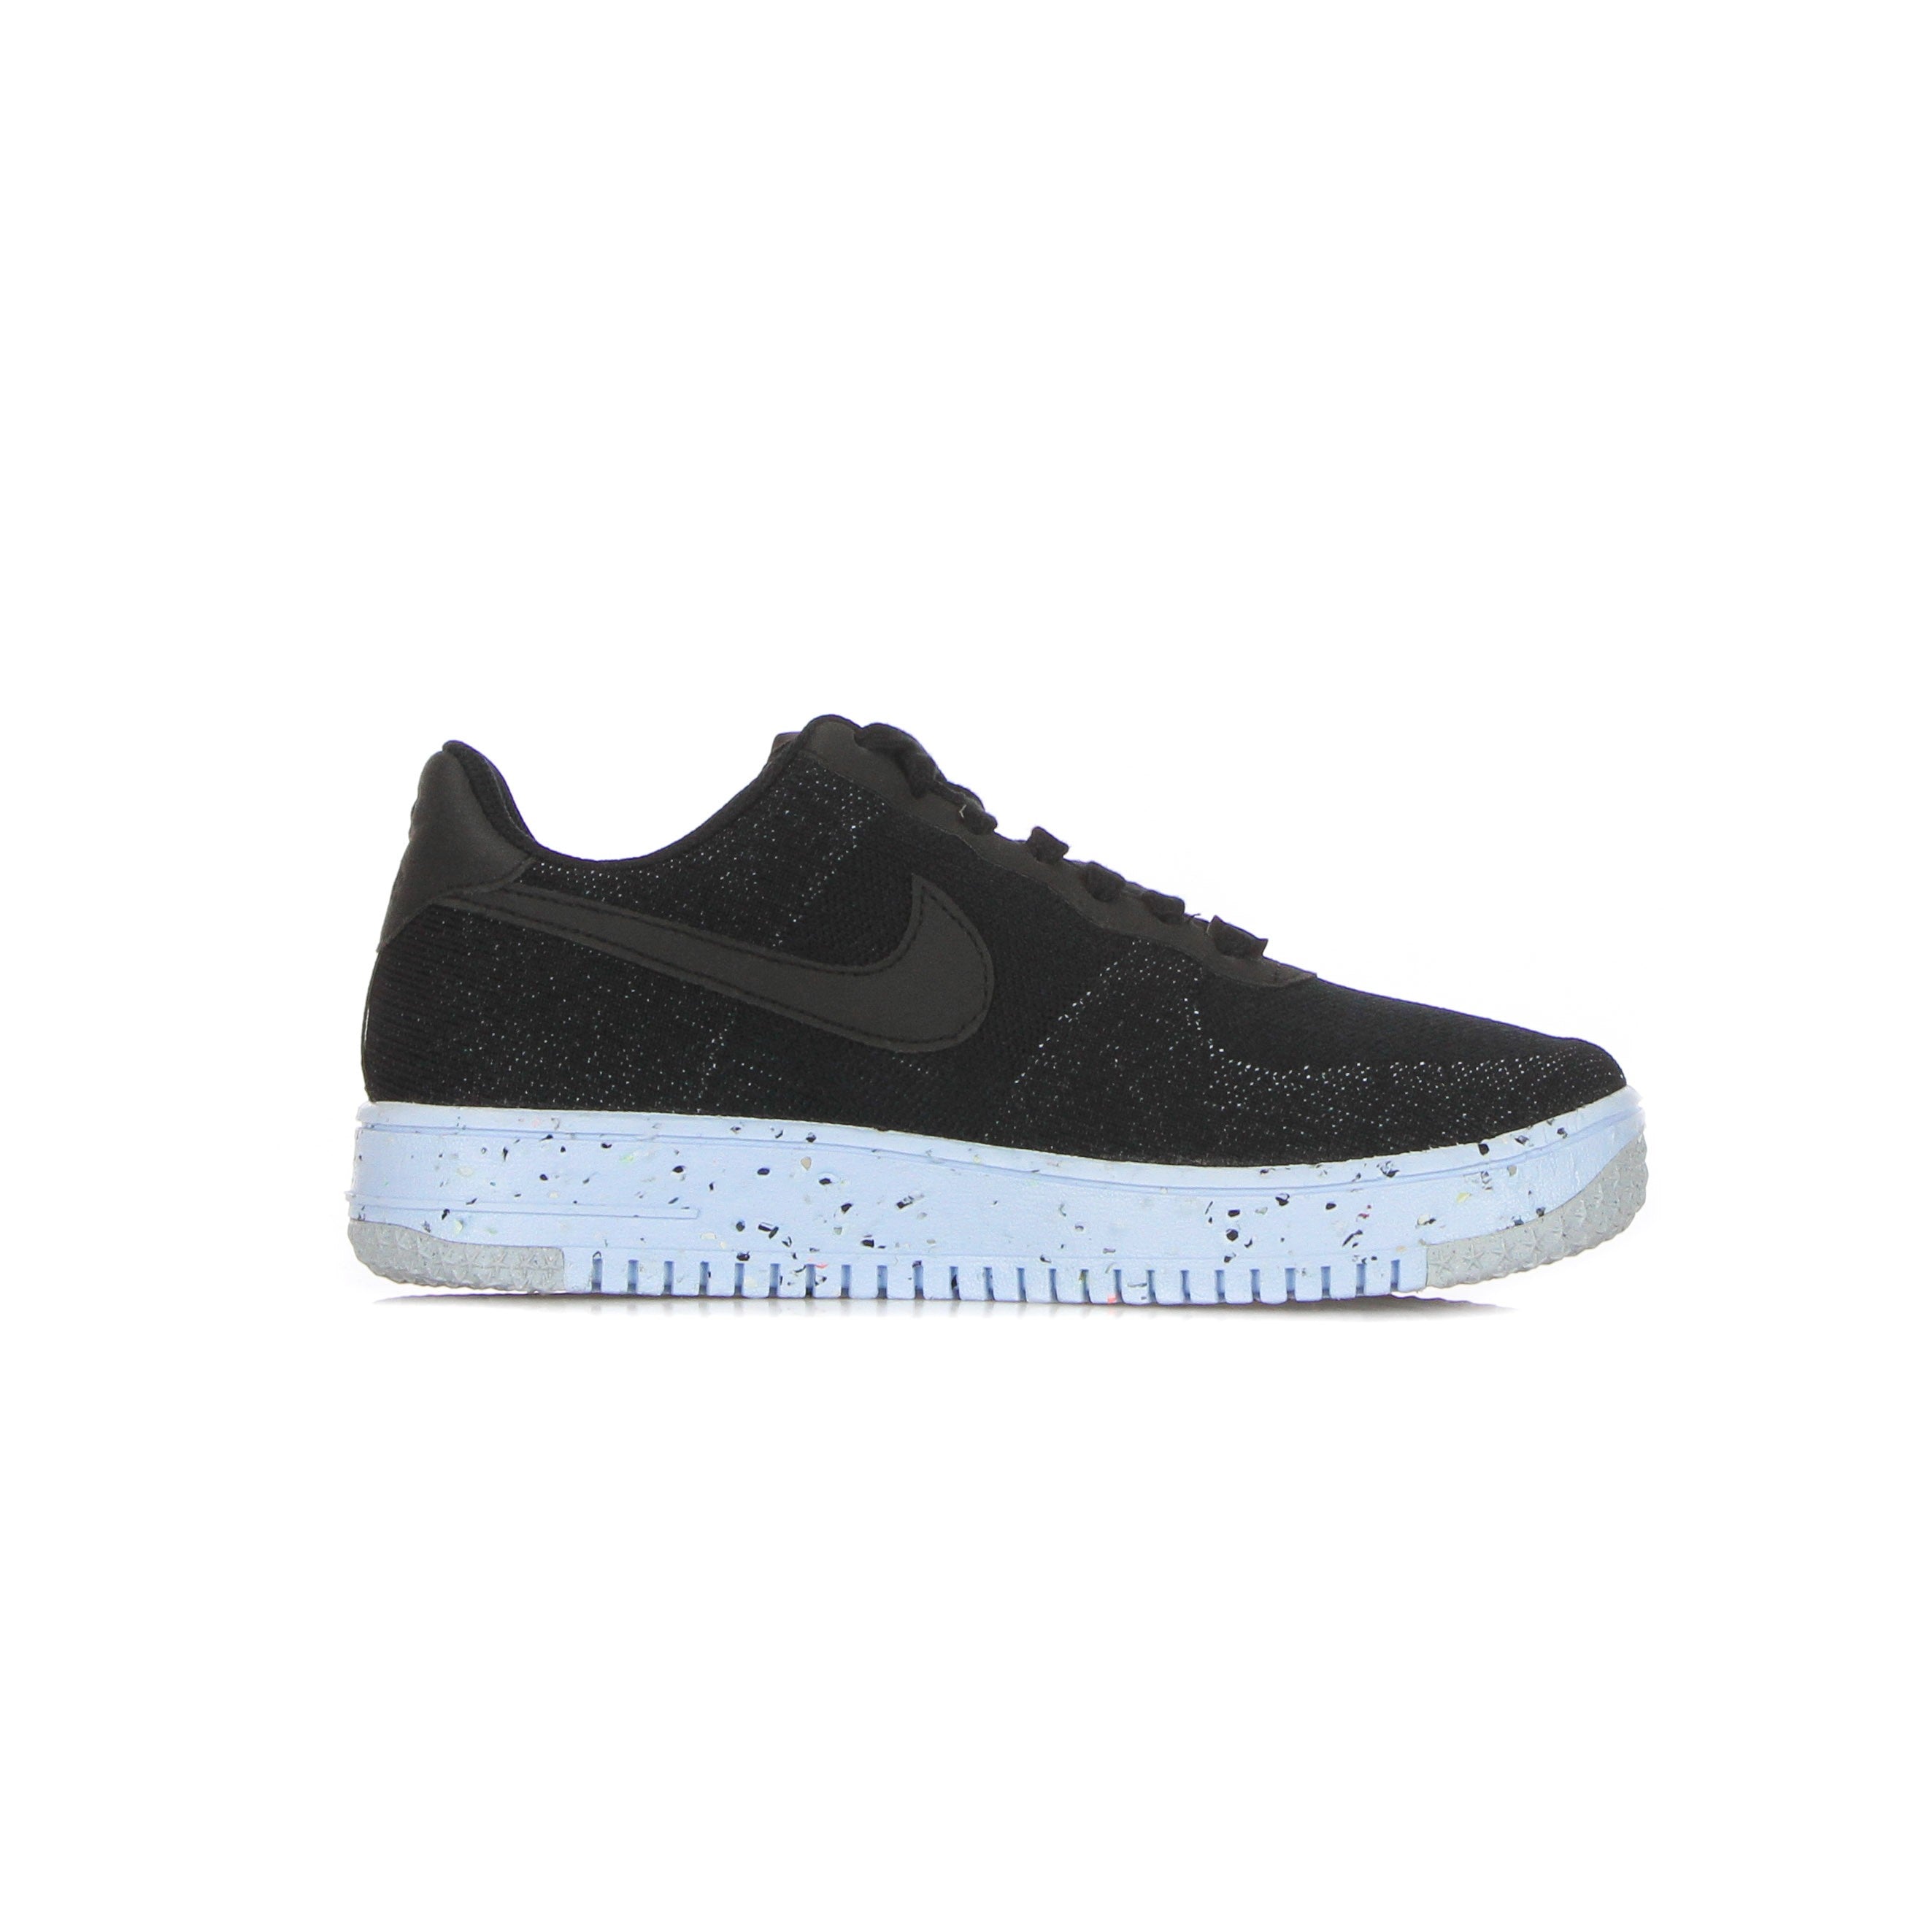 Air Force 1 Crater Flyknit Black/black/chambray Blue Men's Low Shoe